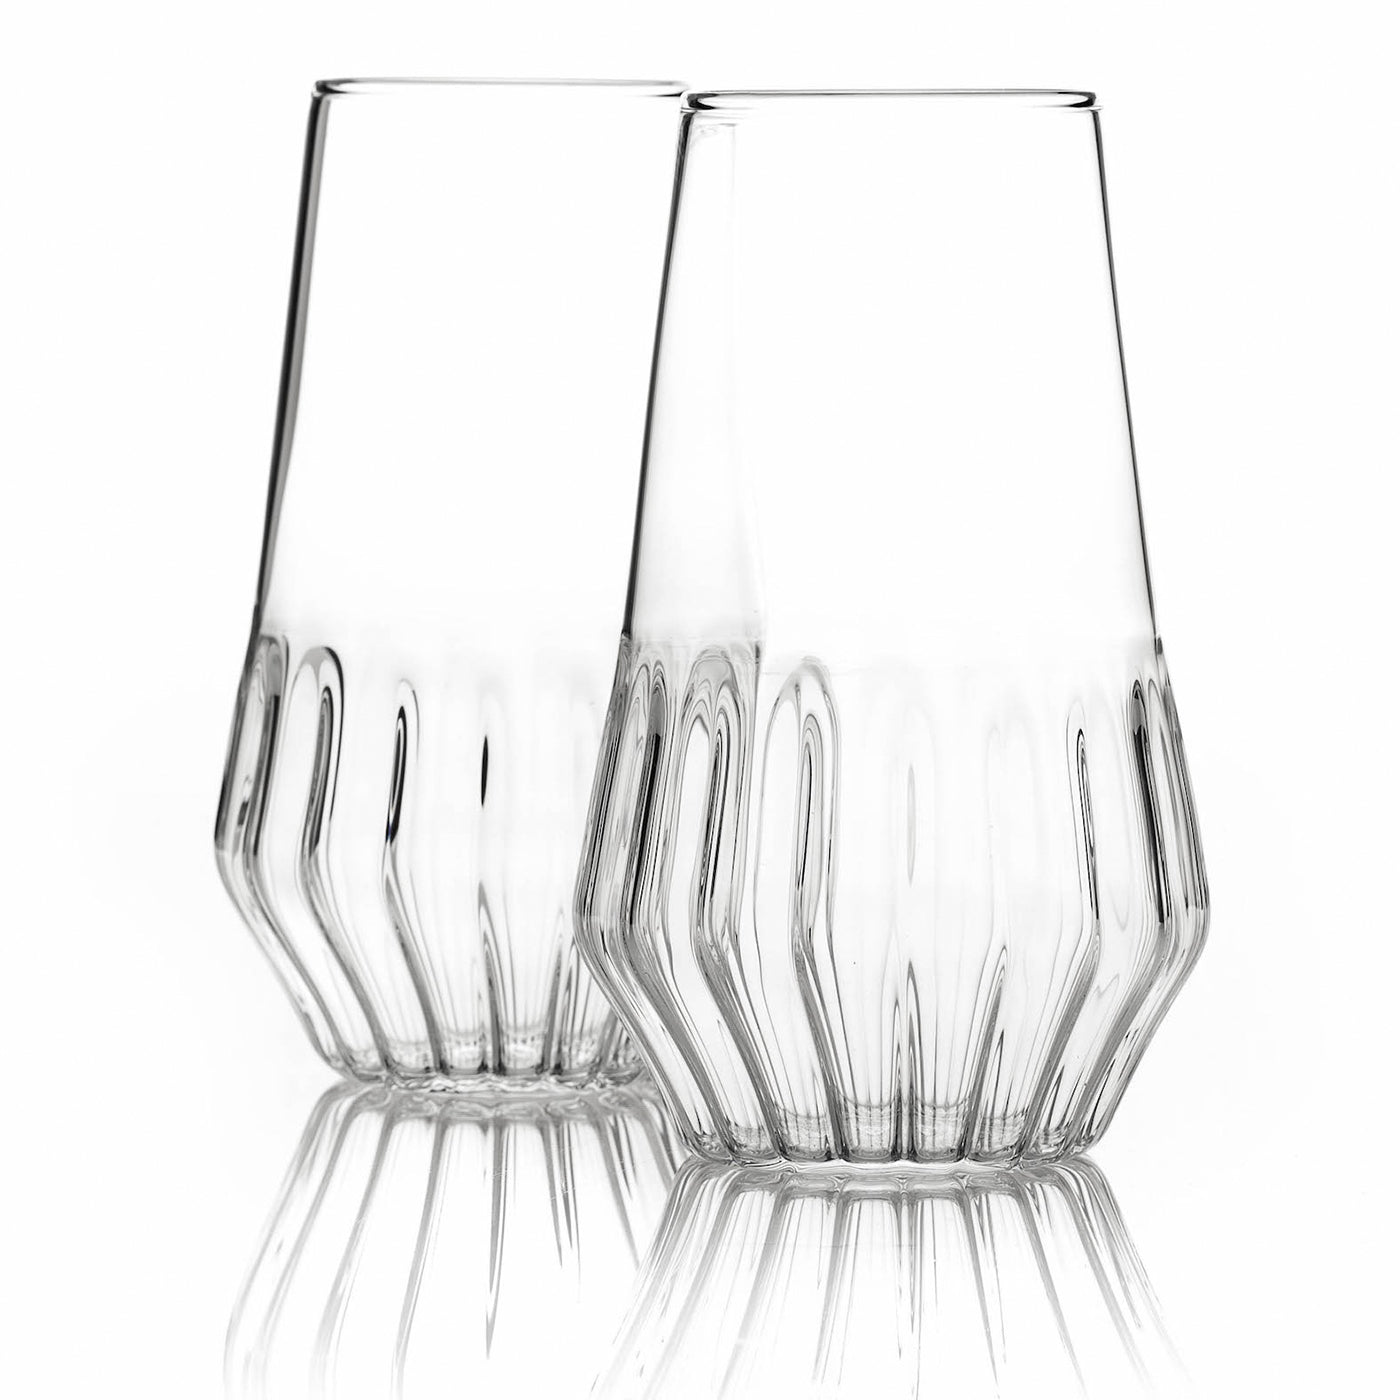 Set of 2 Mixed Large Glasses - Alternative view 1